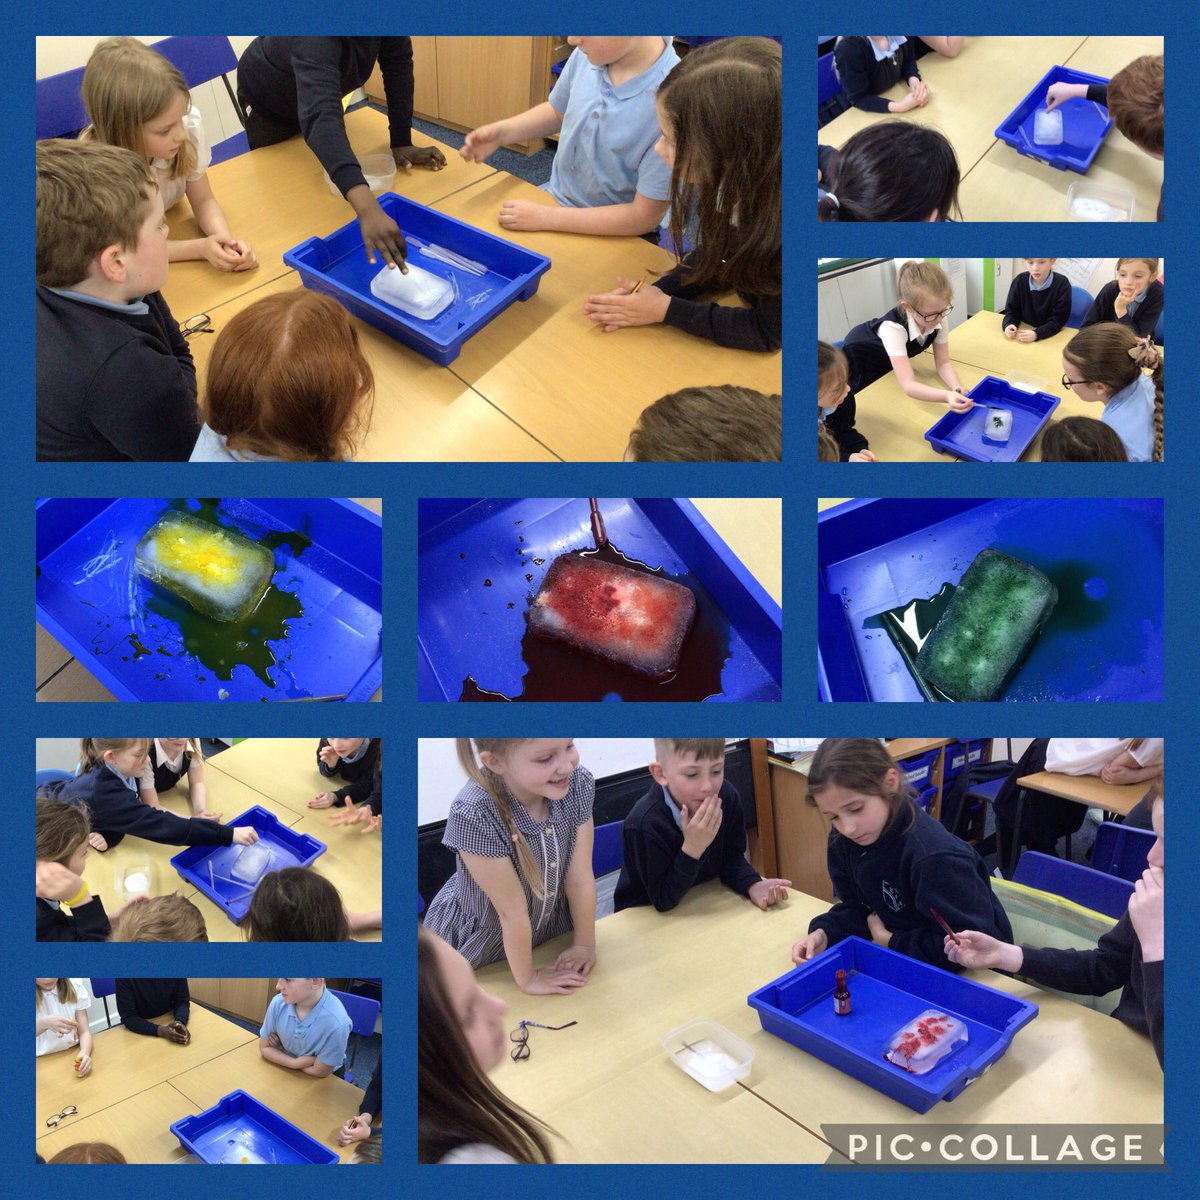 As part of @ScienceWeekUK, #Year4 have been investigating the effect of salt on ice using food colouring to enhance its effects. #BSW24 #BuckinghamScience